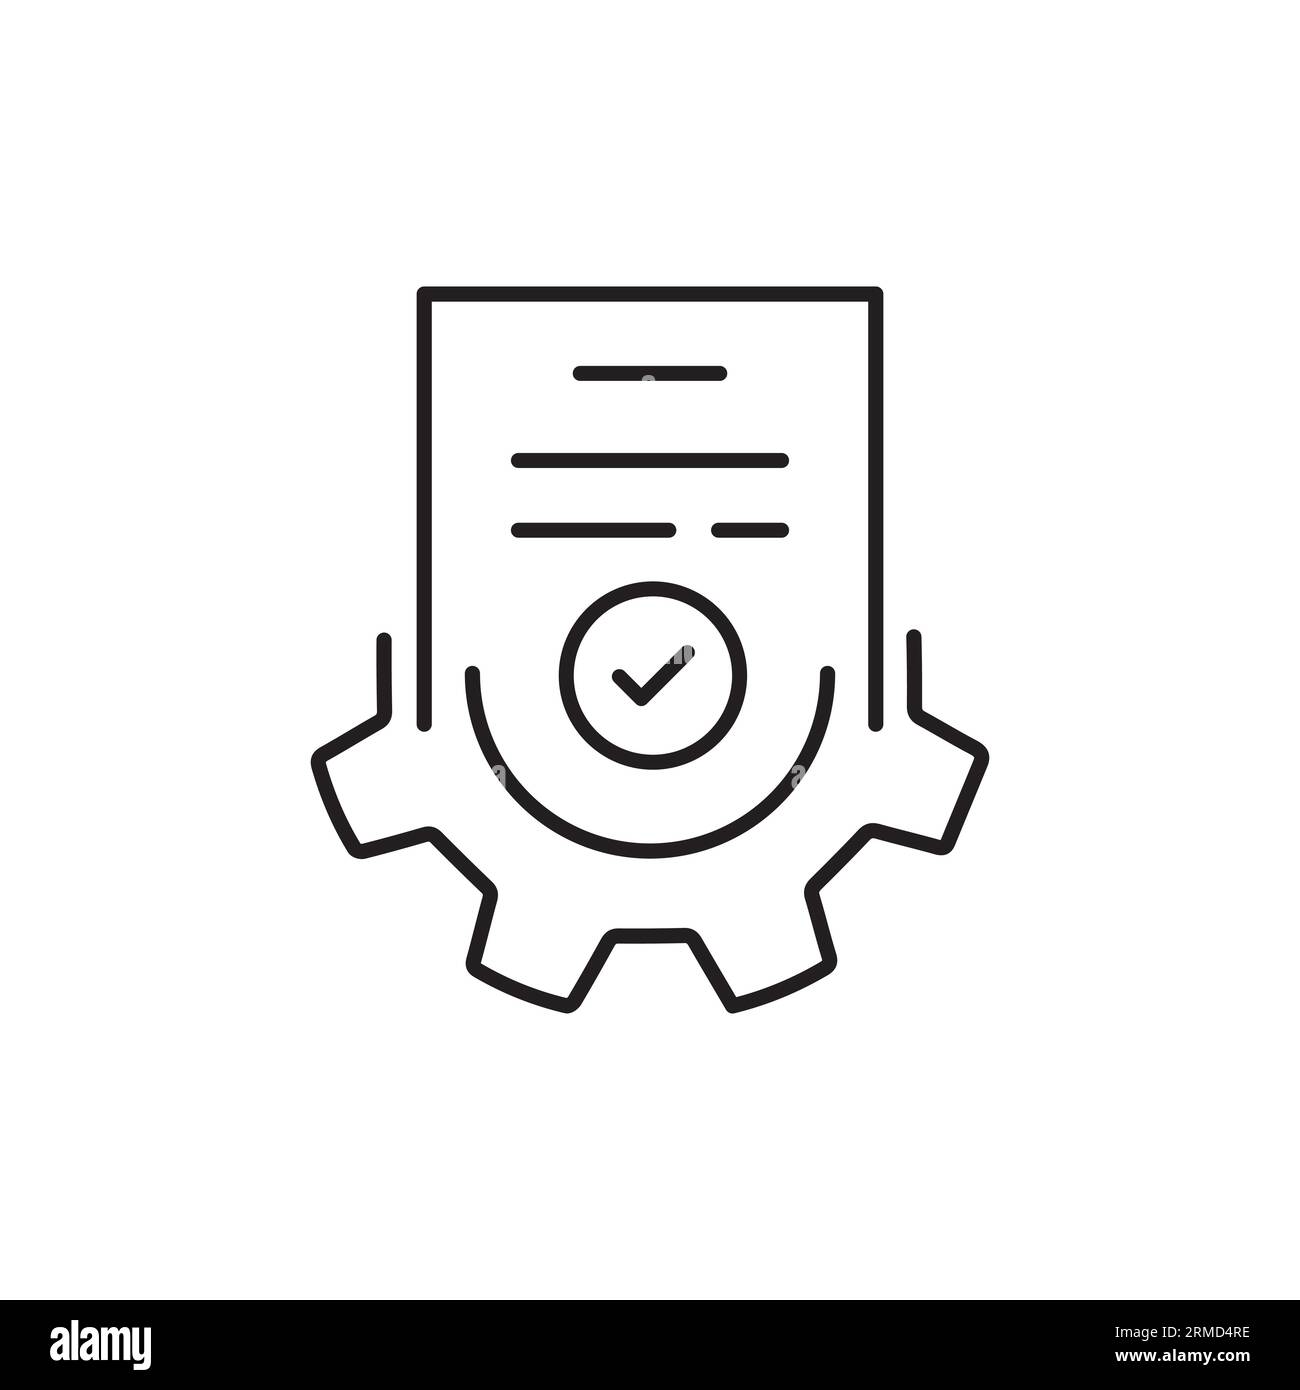 doc with gear icon like approved document flow. concept of paperwork regulatory process or checklist order. linear modern business efficiency logotype Stock Vector